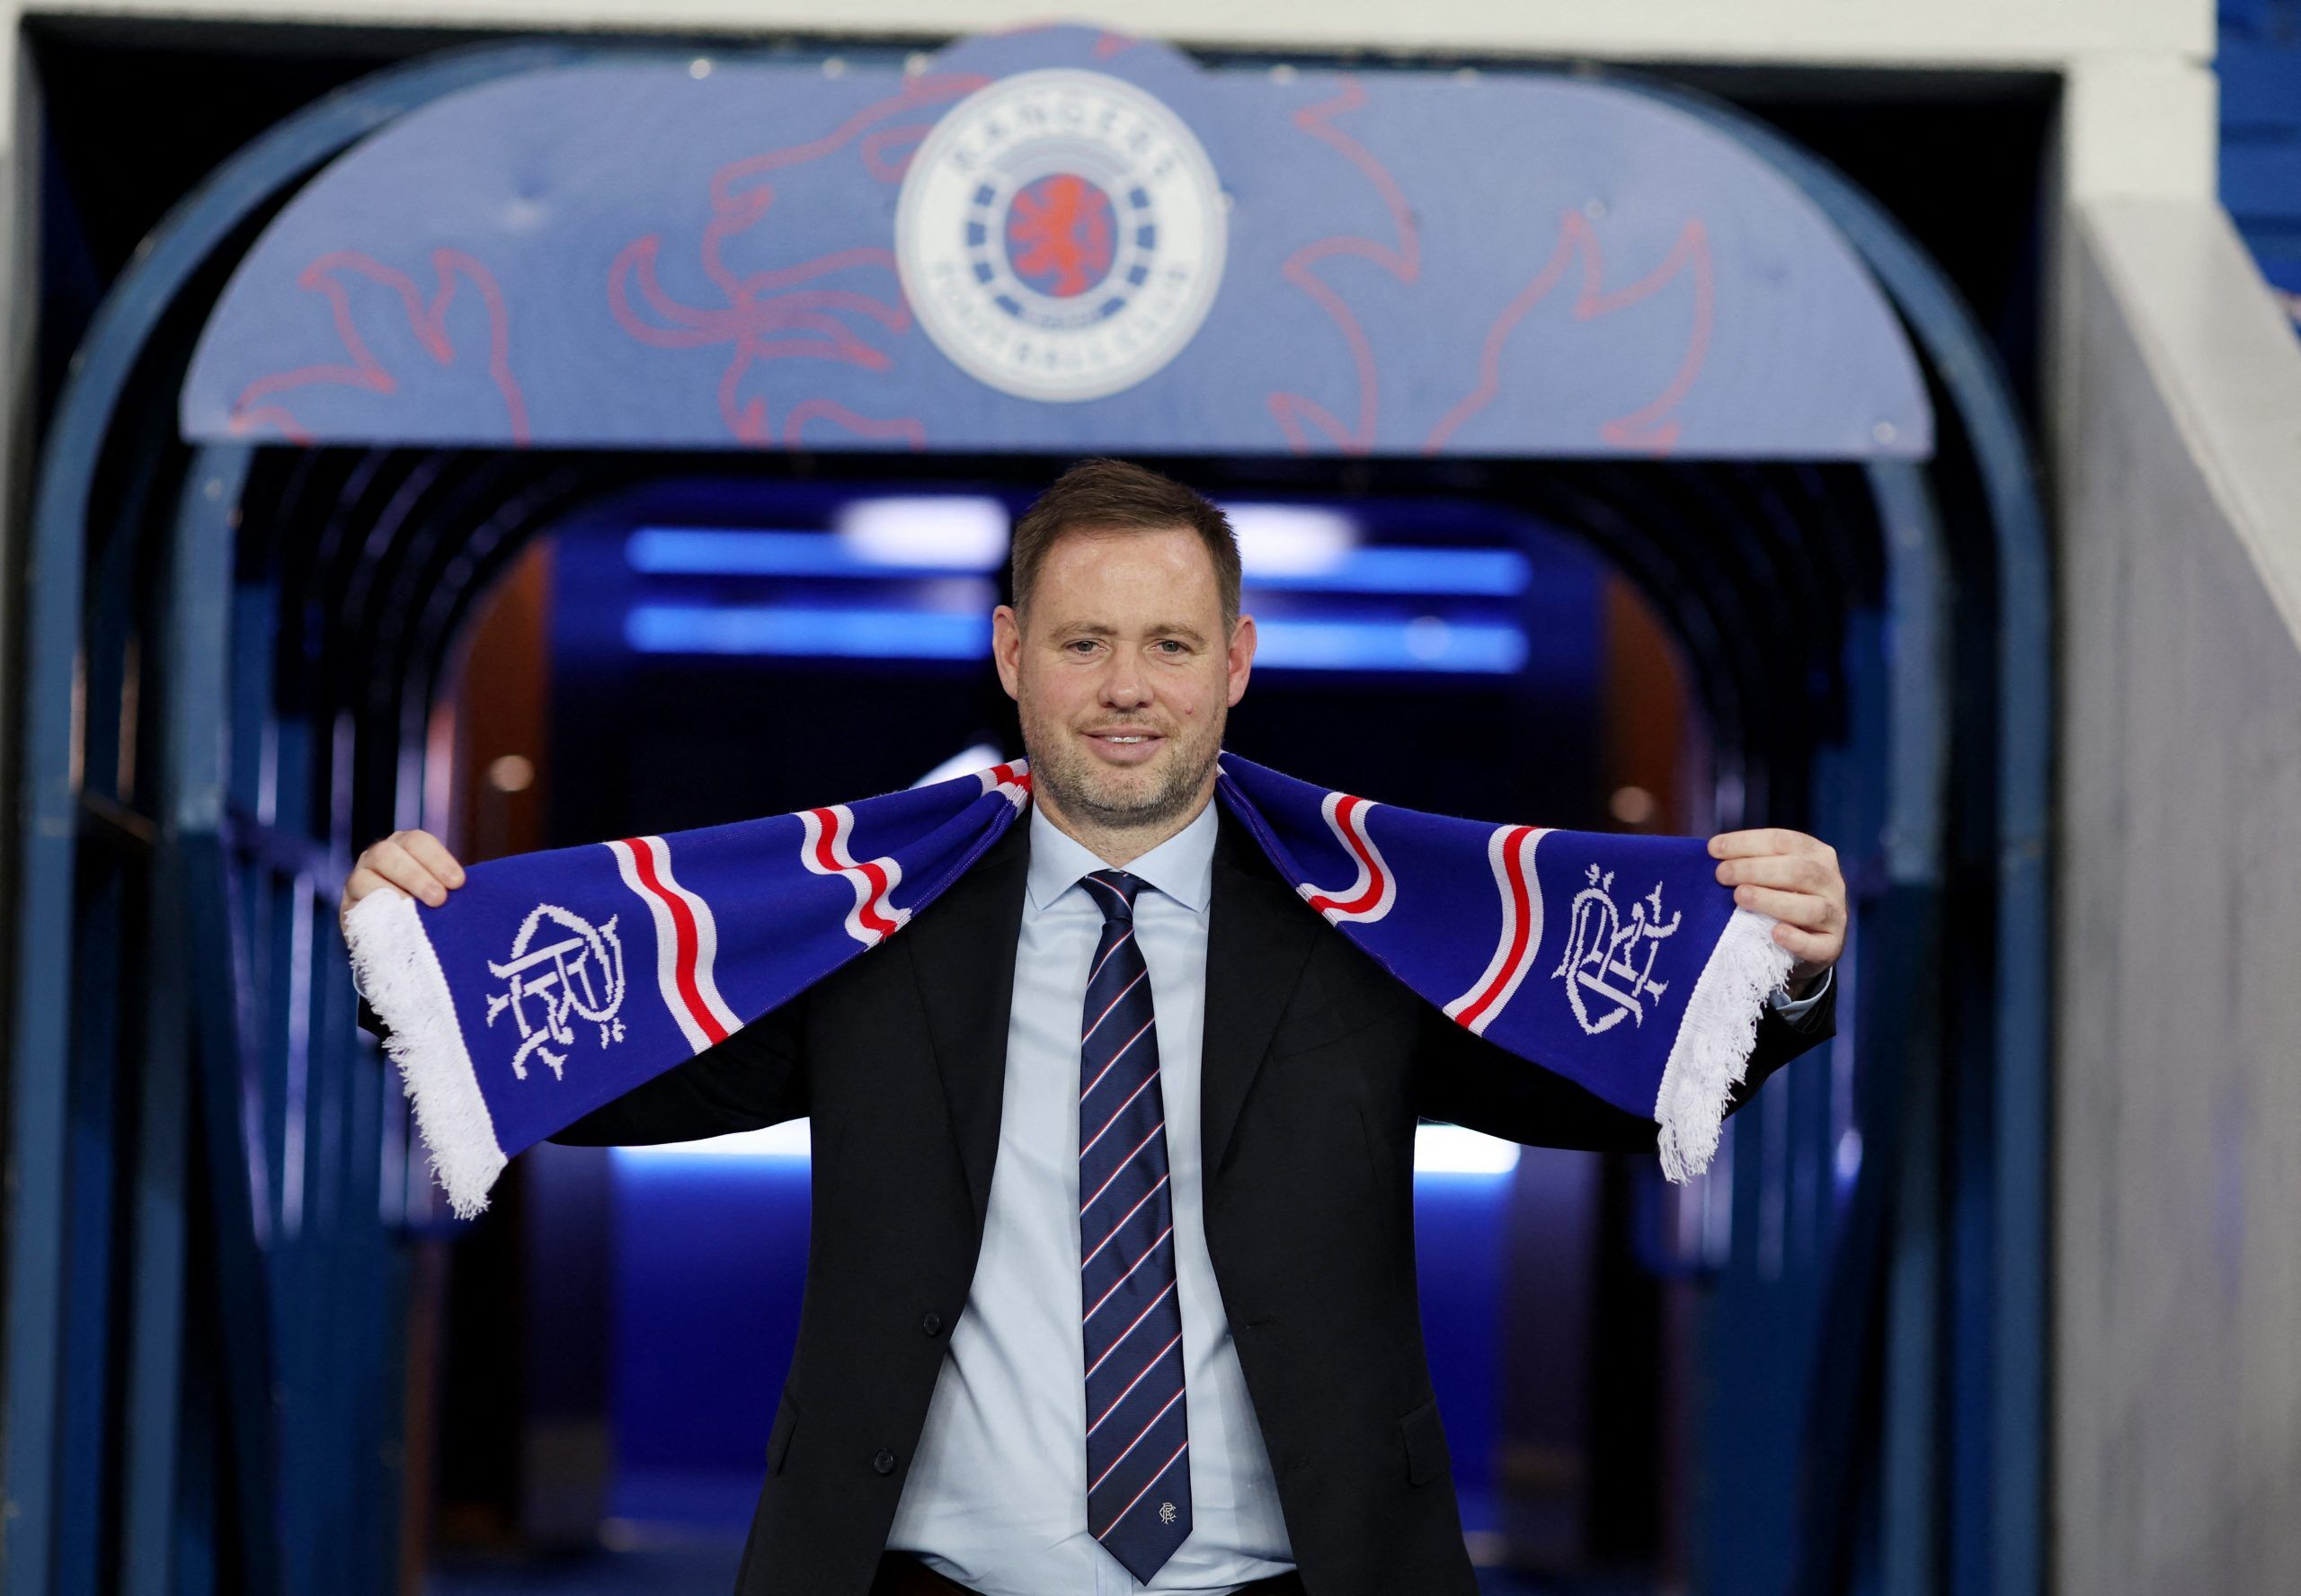 Soccer Football - Rangers Photocall with new manager Michael Beale - Ibrox, Glasgow, Scotland, Britain - December 1, 2022 New Rangers manager Michael Beale poses with a Rangers scarf REUTERS/Russell Cheyne